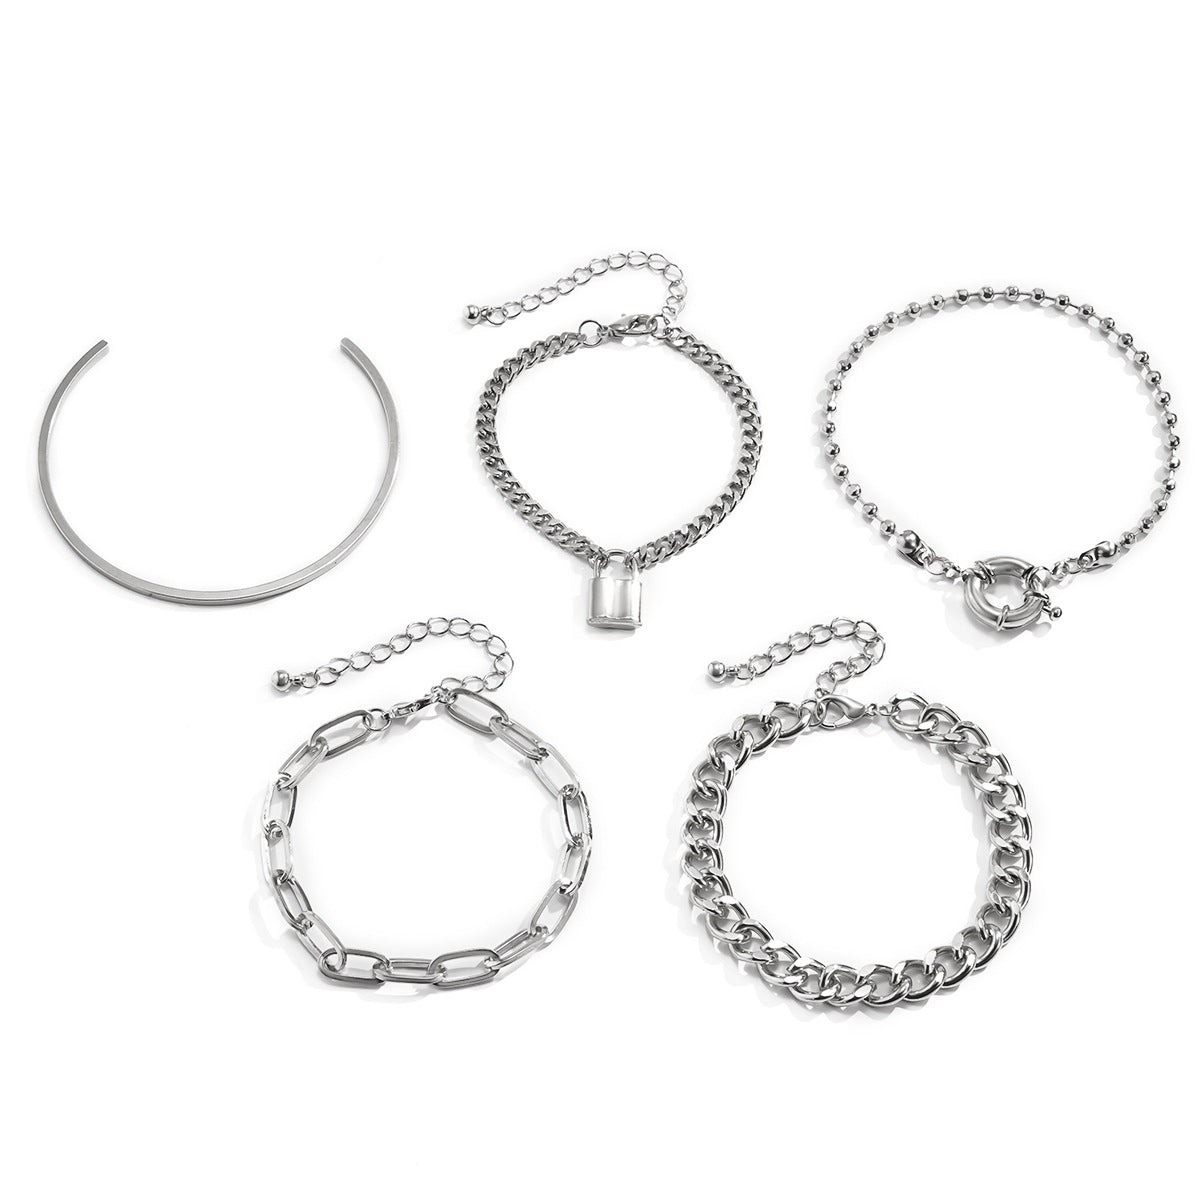 Gorgeous Cutout Open Bracelet Set - Perfect for Any Occasion!